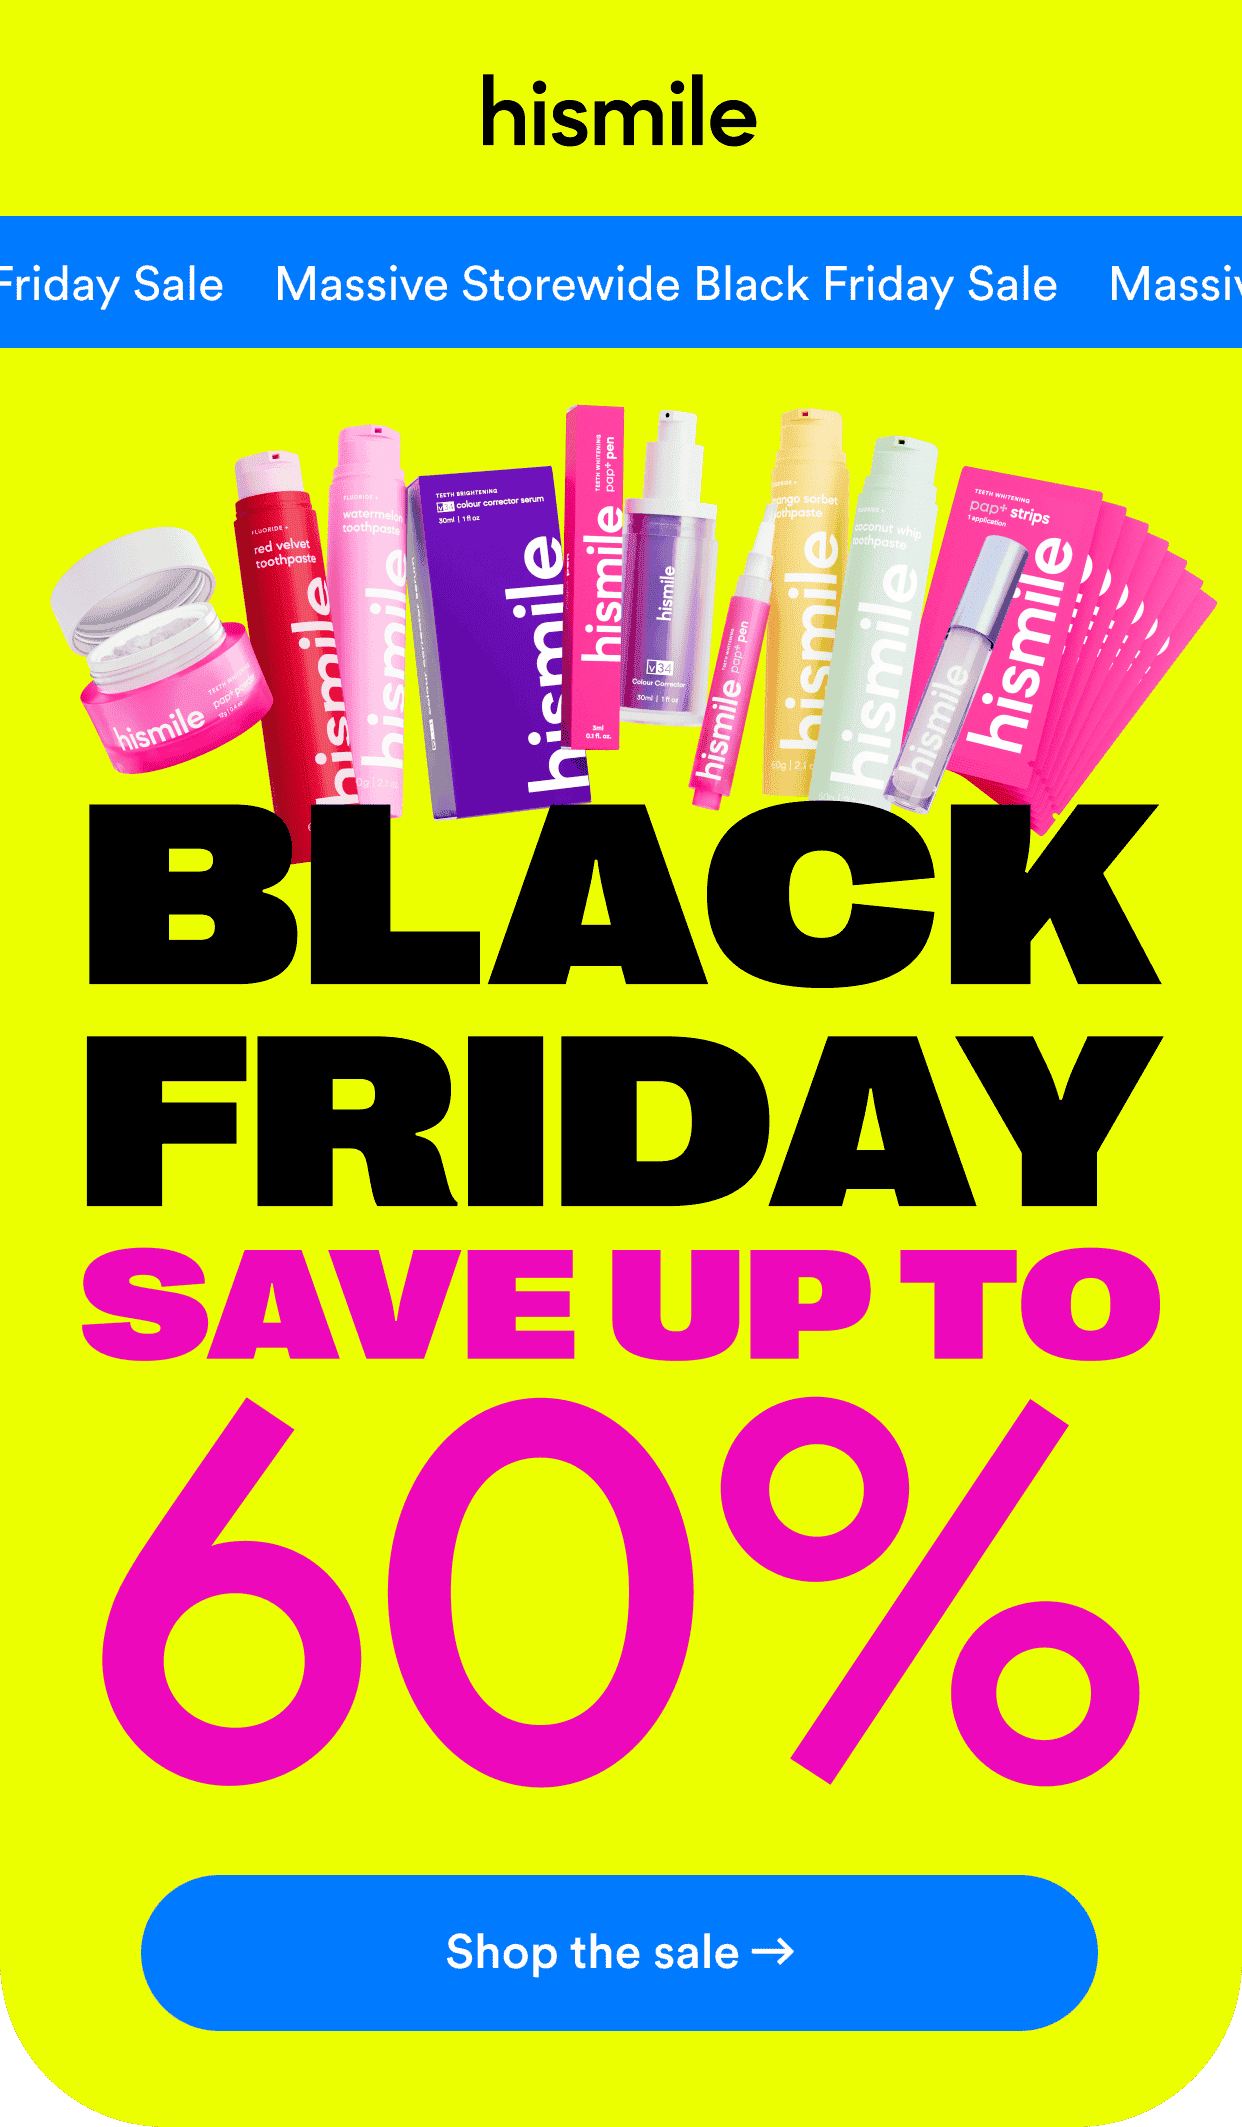 Massive storewide Black Friday sale. Save up to 60%. Lock in savings!